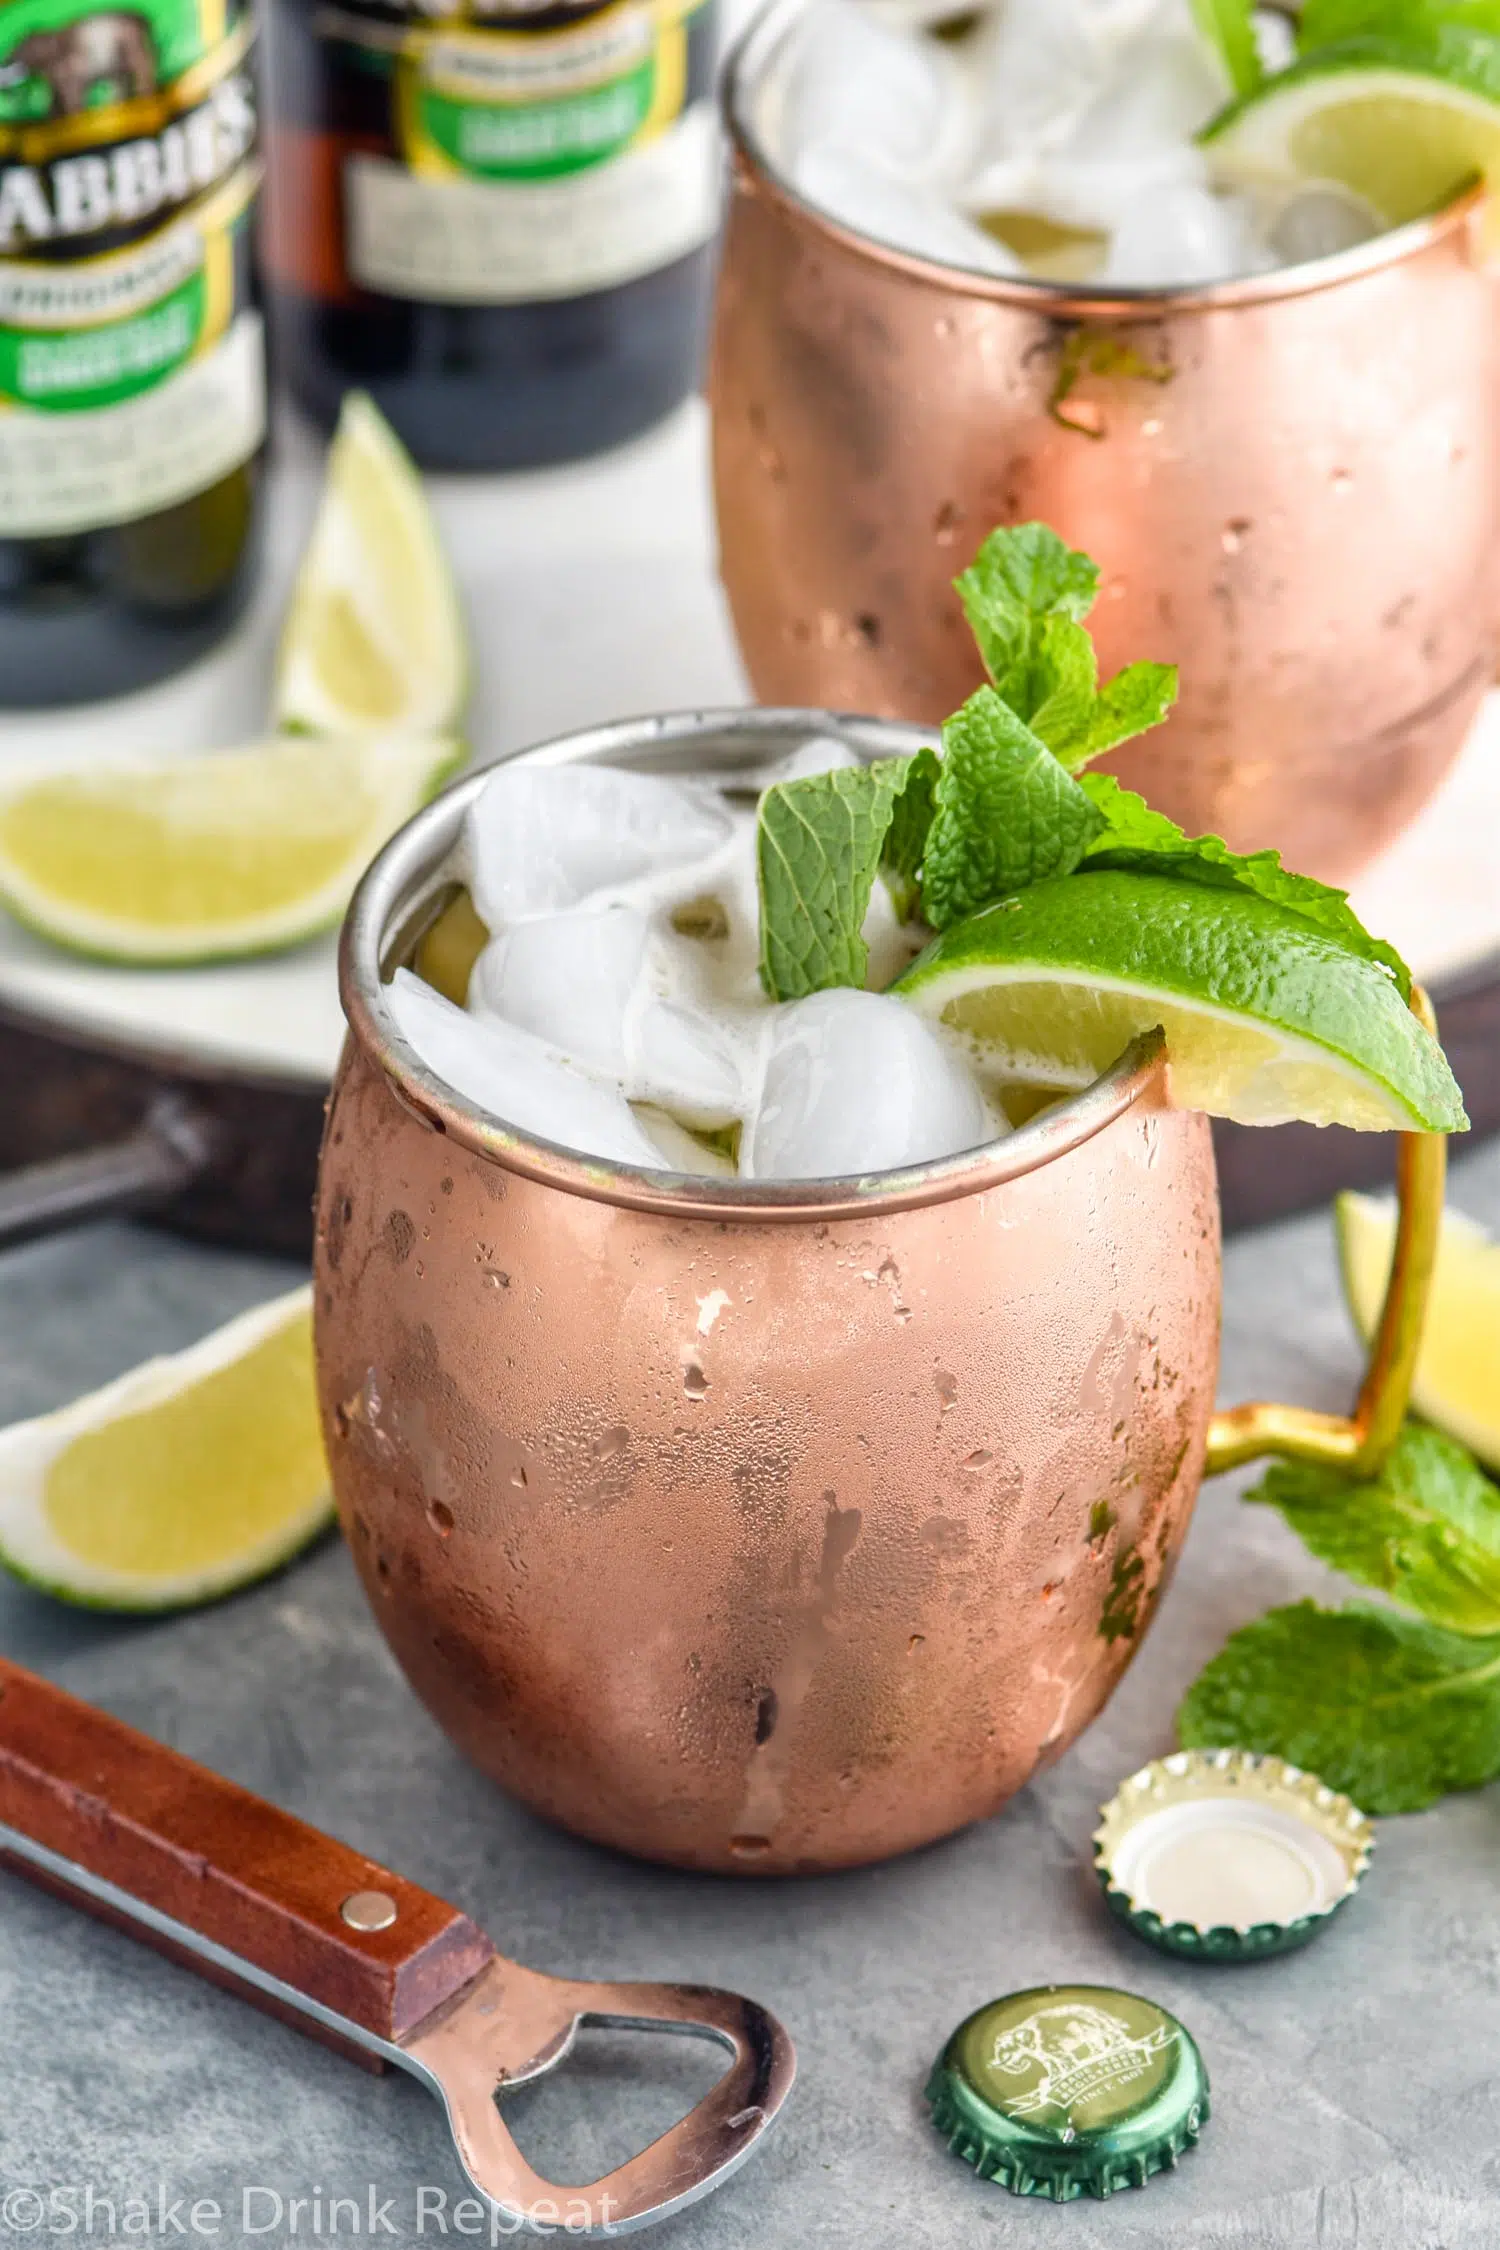 two copper mugs of moscow mule with gin with ice, garnished with mint leaves and limes, two bottles of ginger beer in background